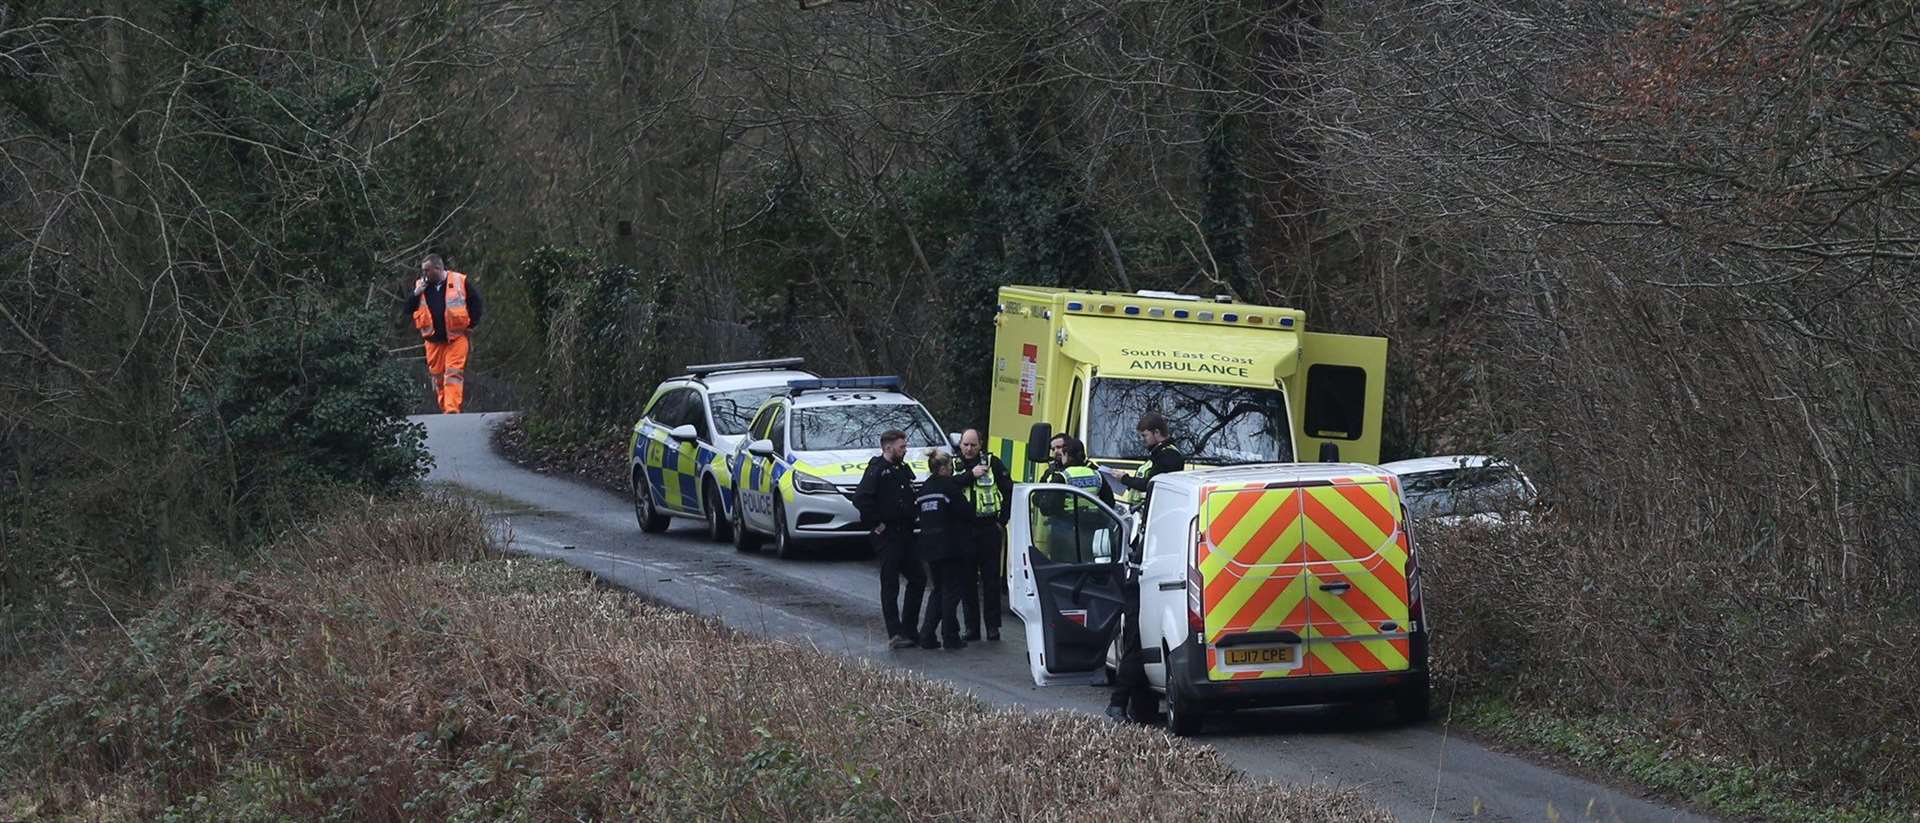 Police and ambulance at the scene. Picture: UKNIP